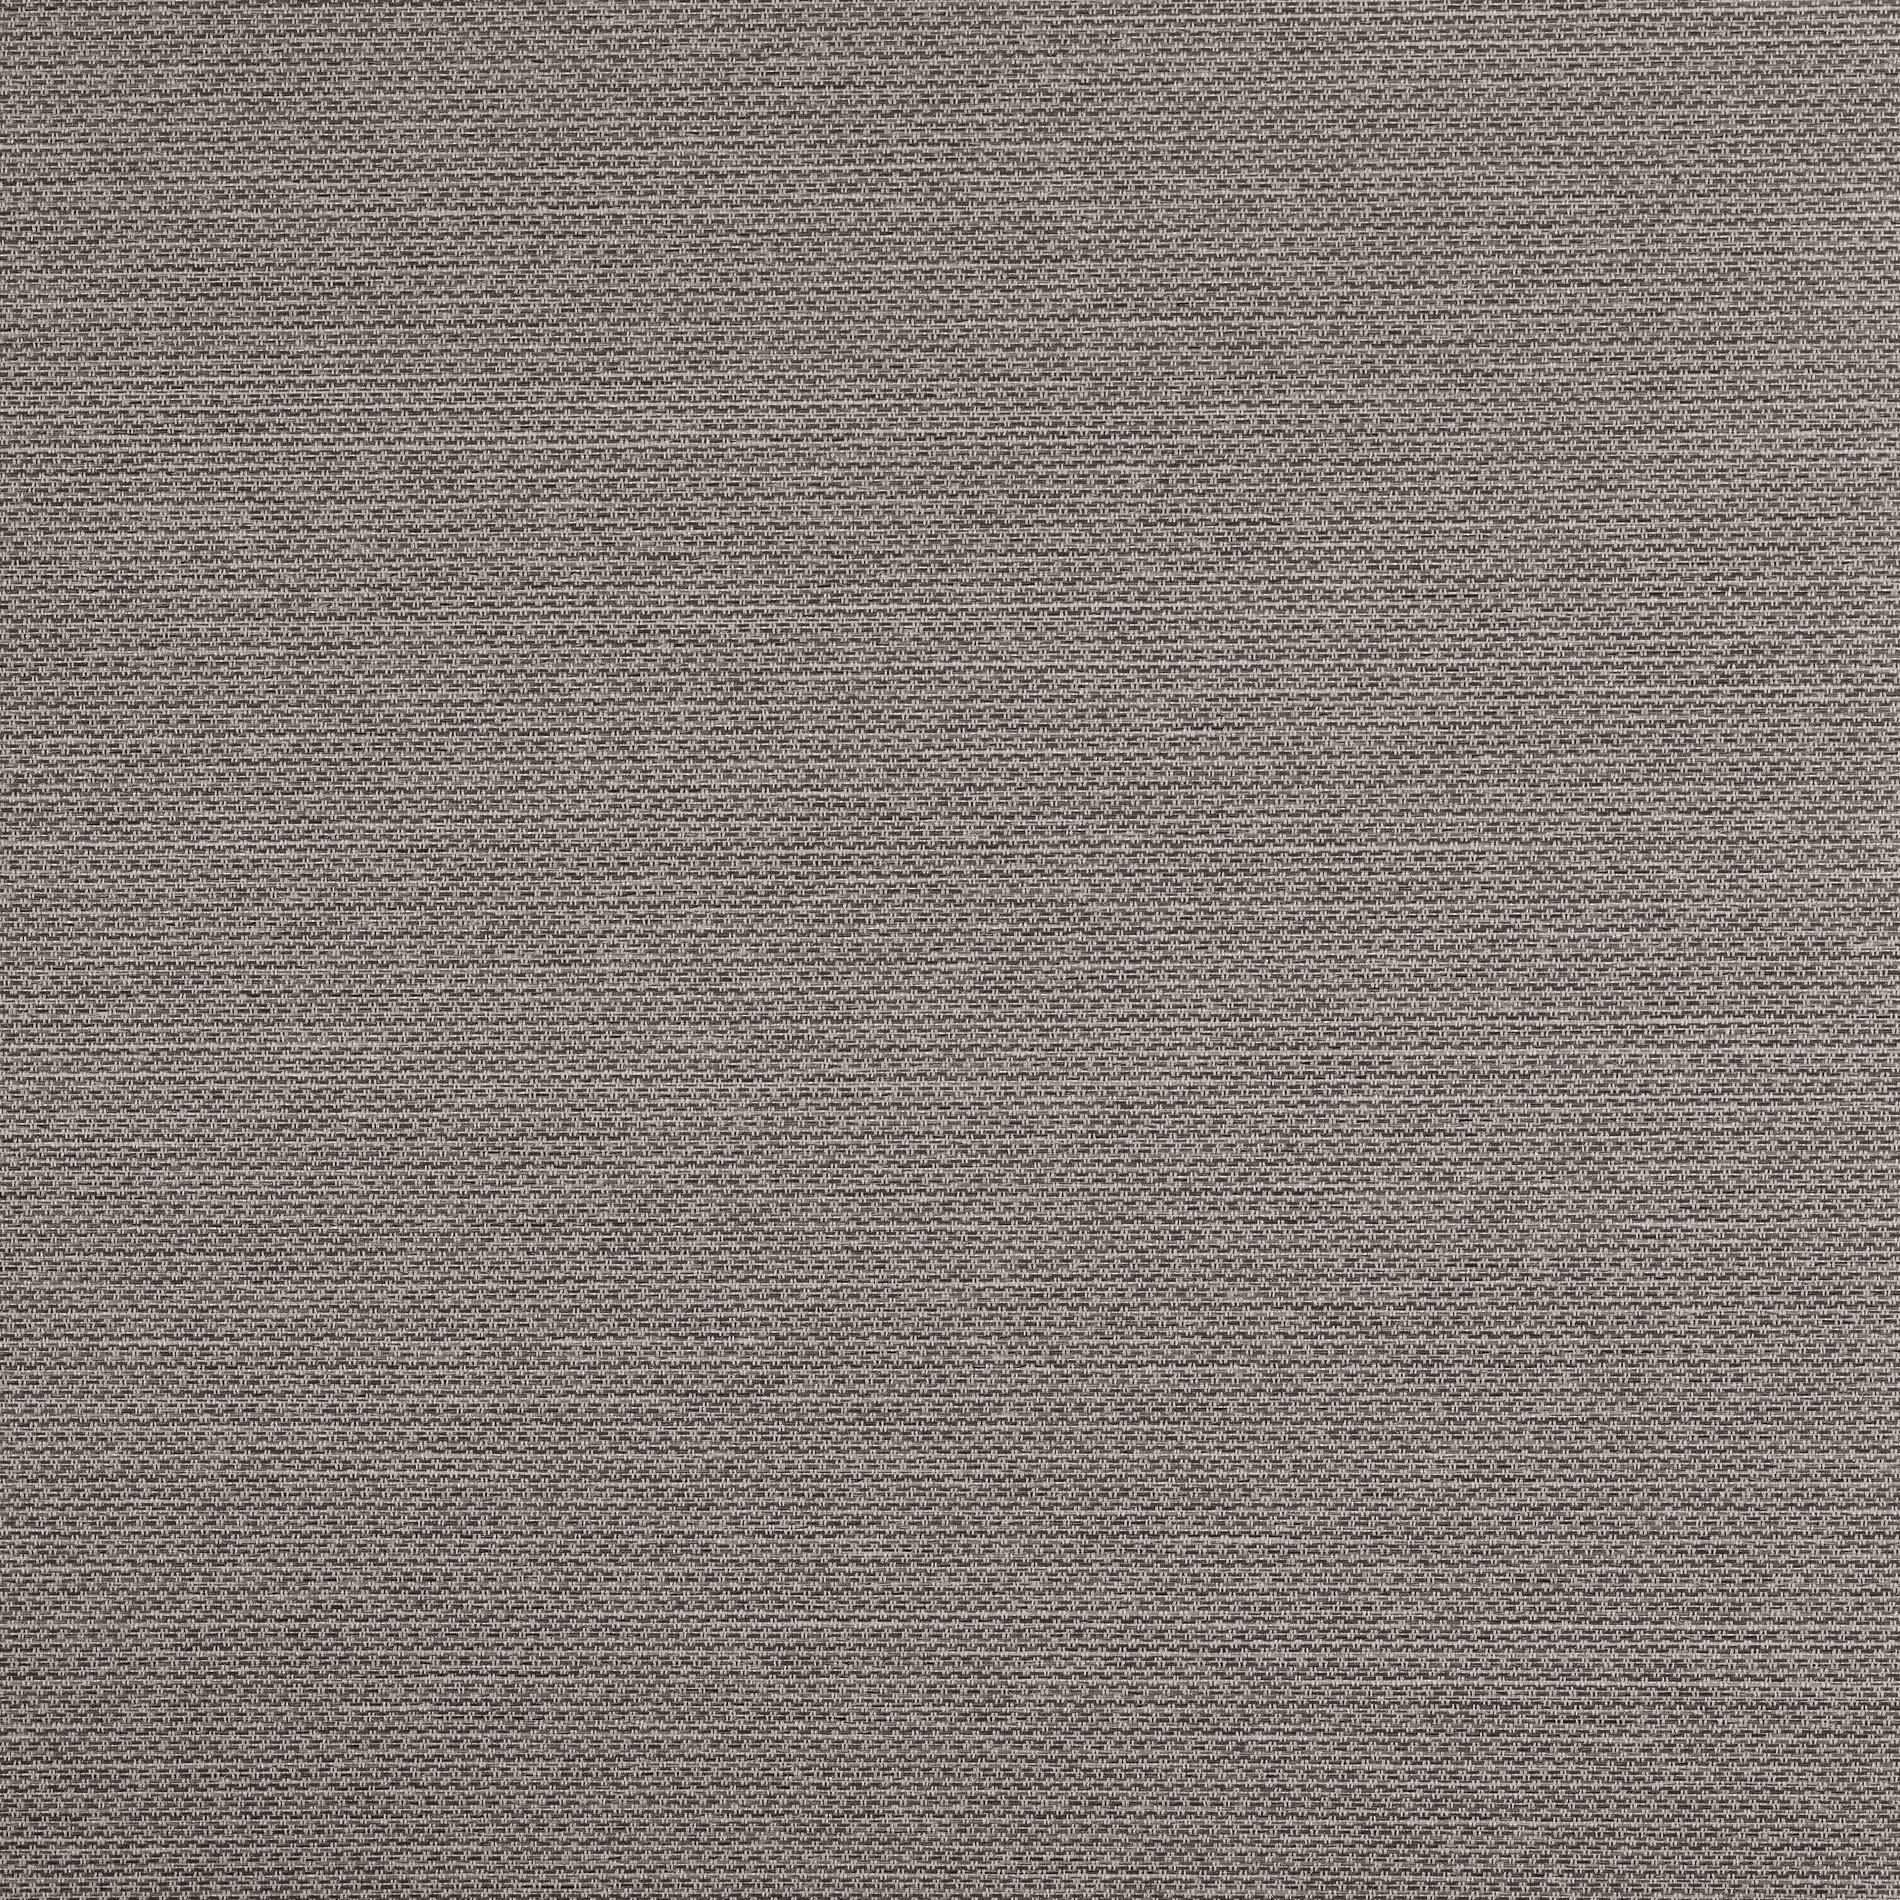 Altex - Fabric - BUXTON OPAQUE - Pewter - 14BR34286